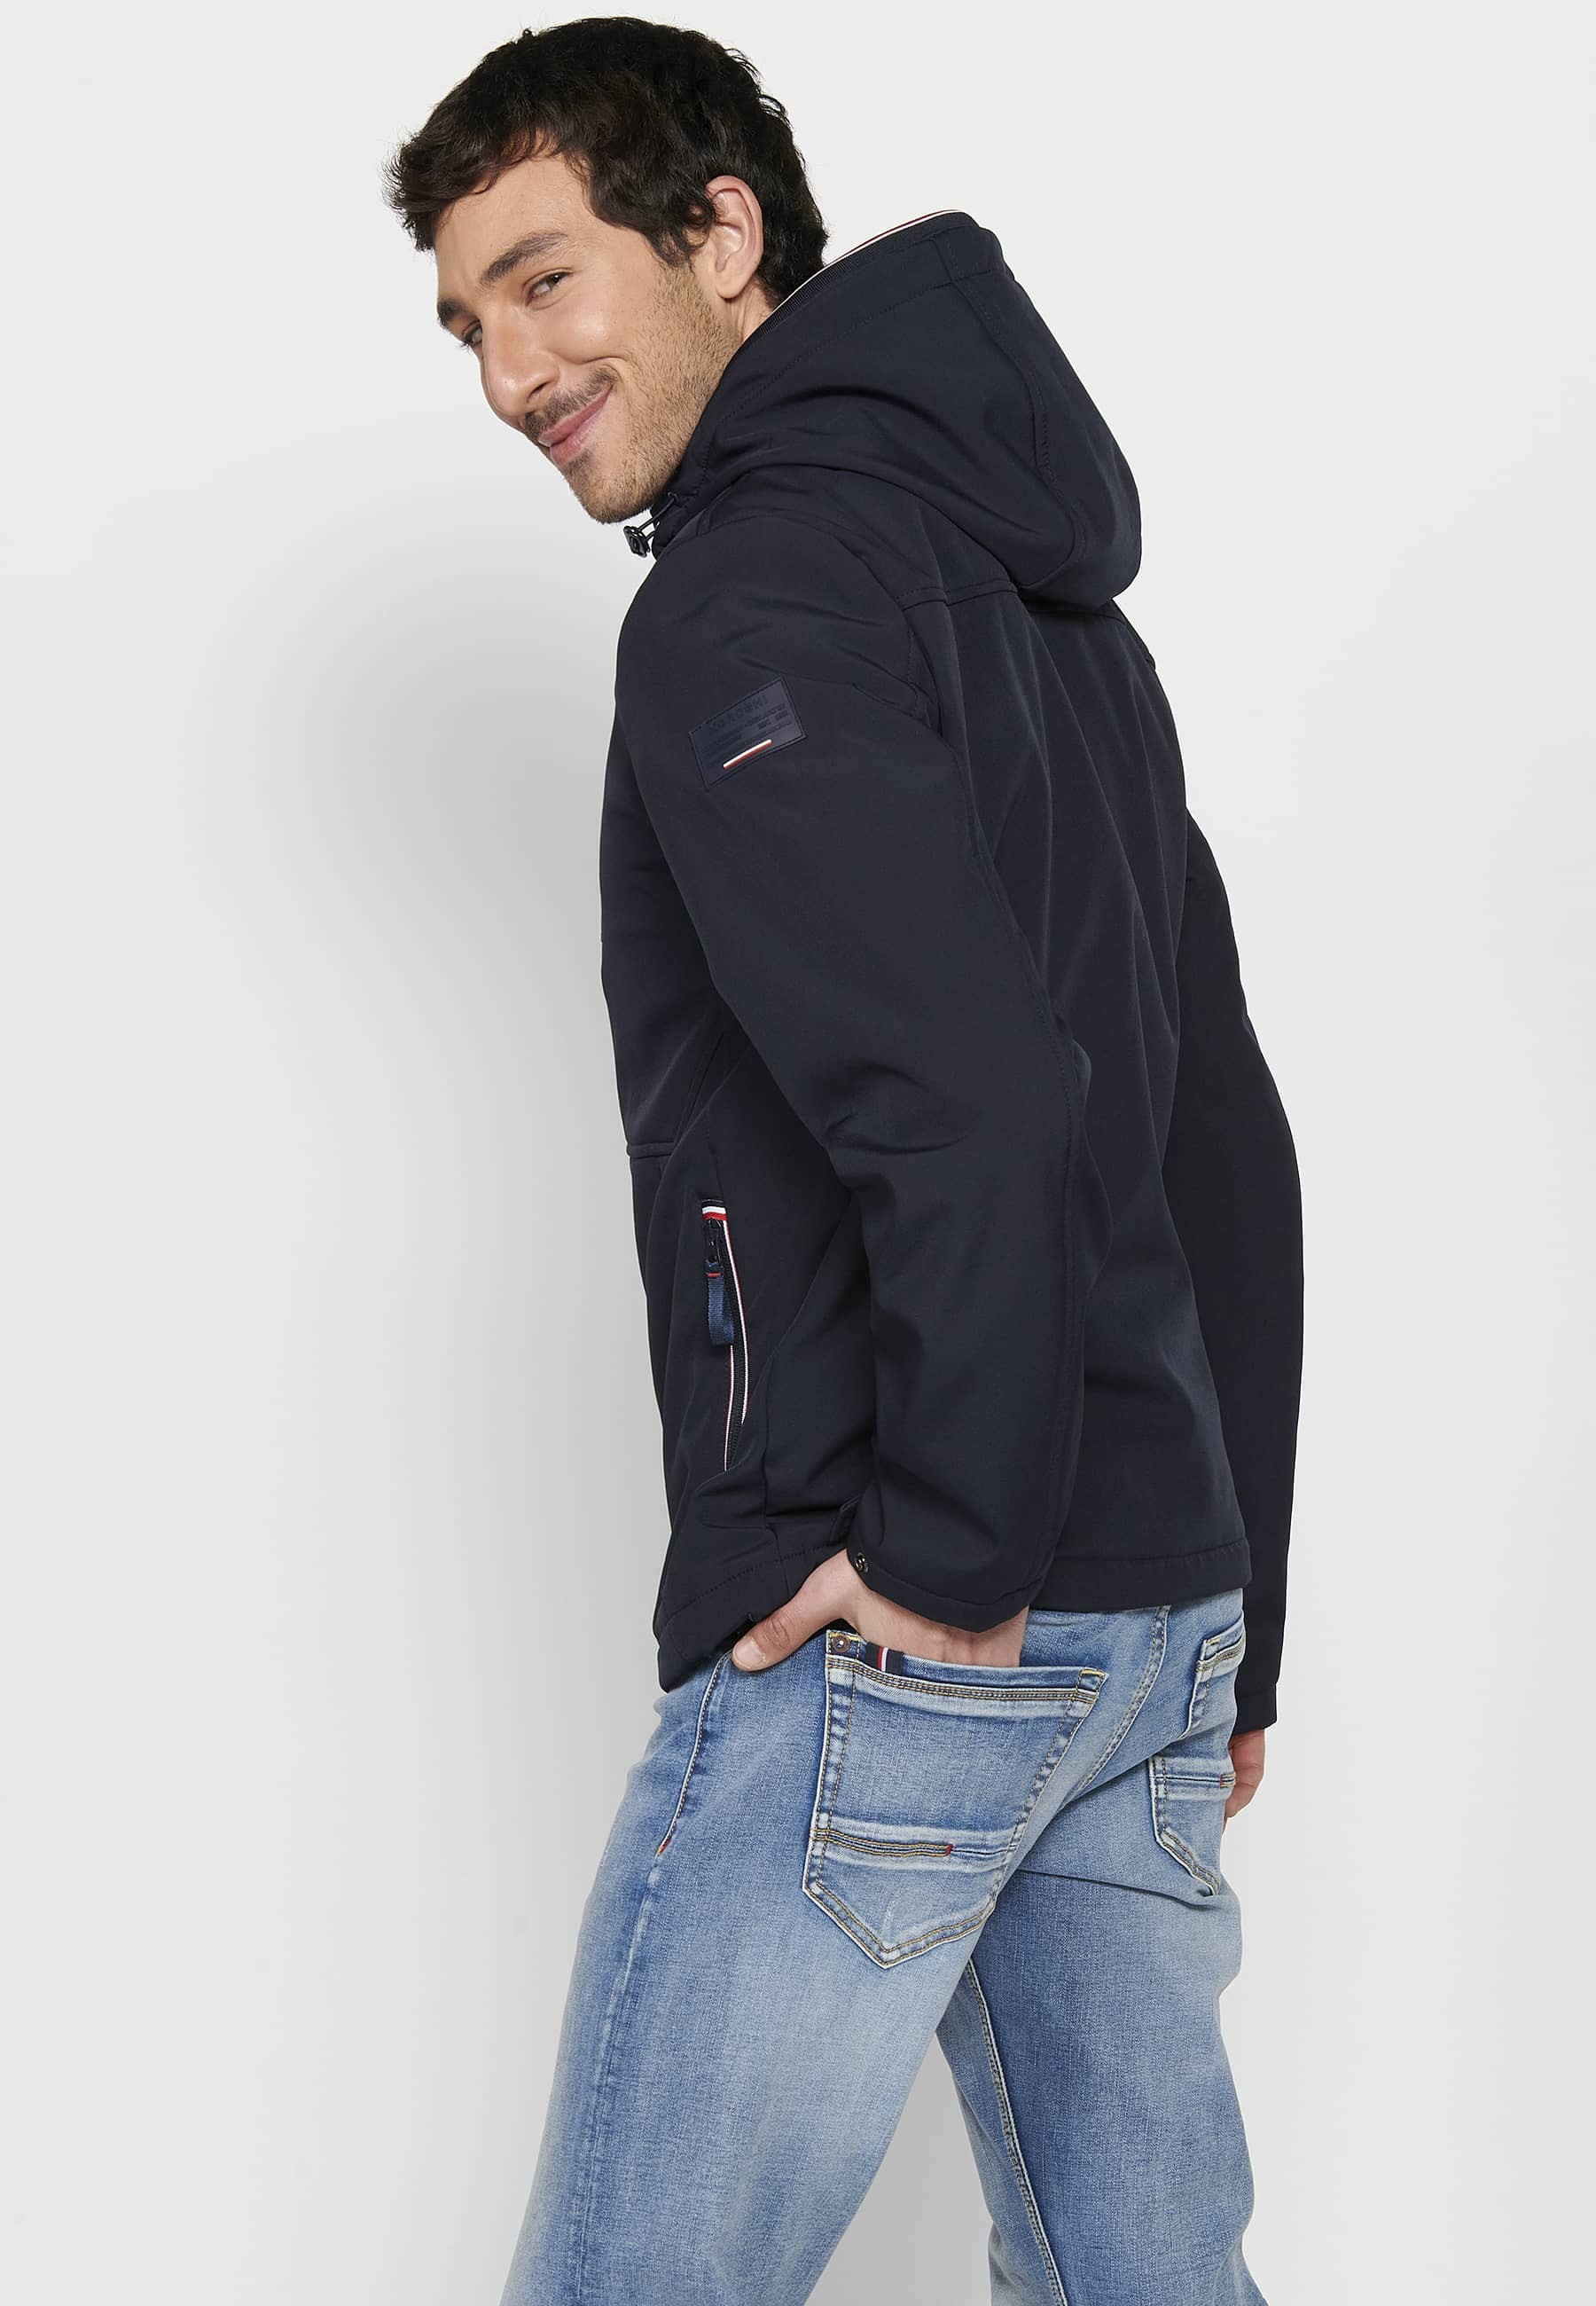 Navy Long Sleeve Jacket with Hooded Collar and Front Zipper Closure for Men 1